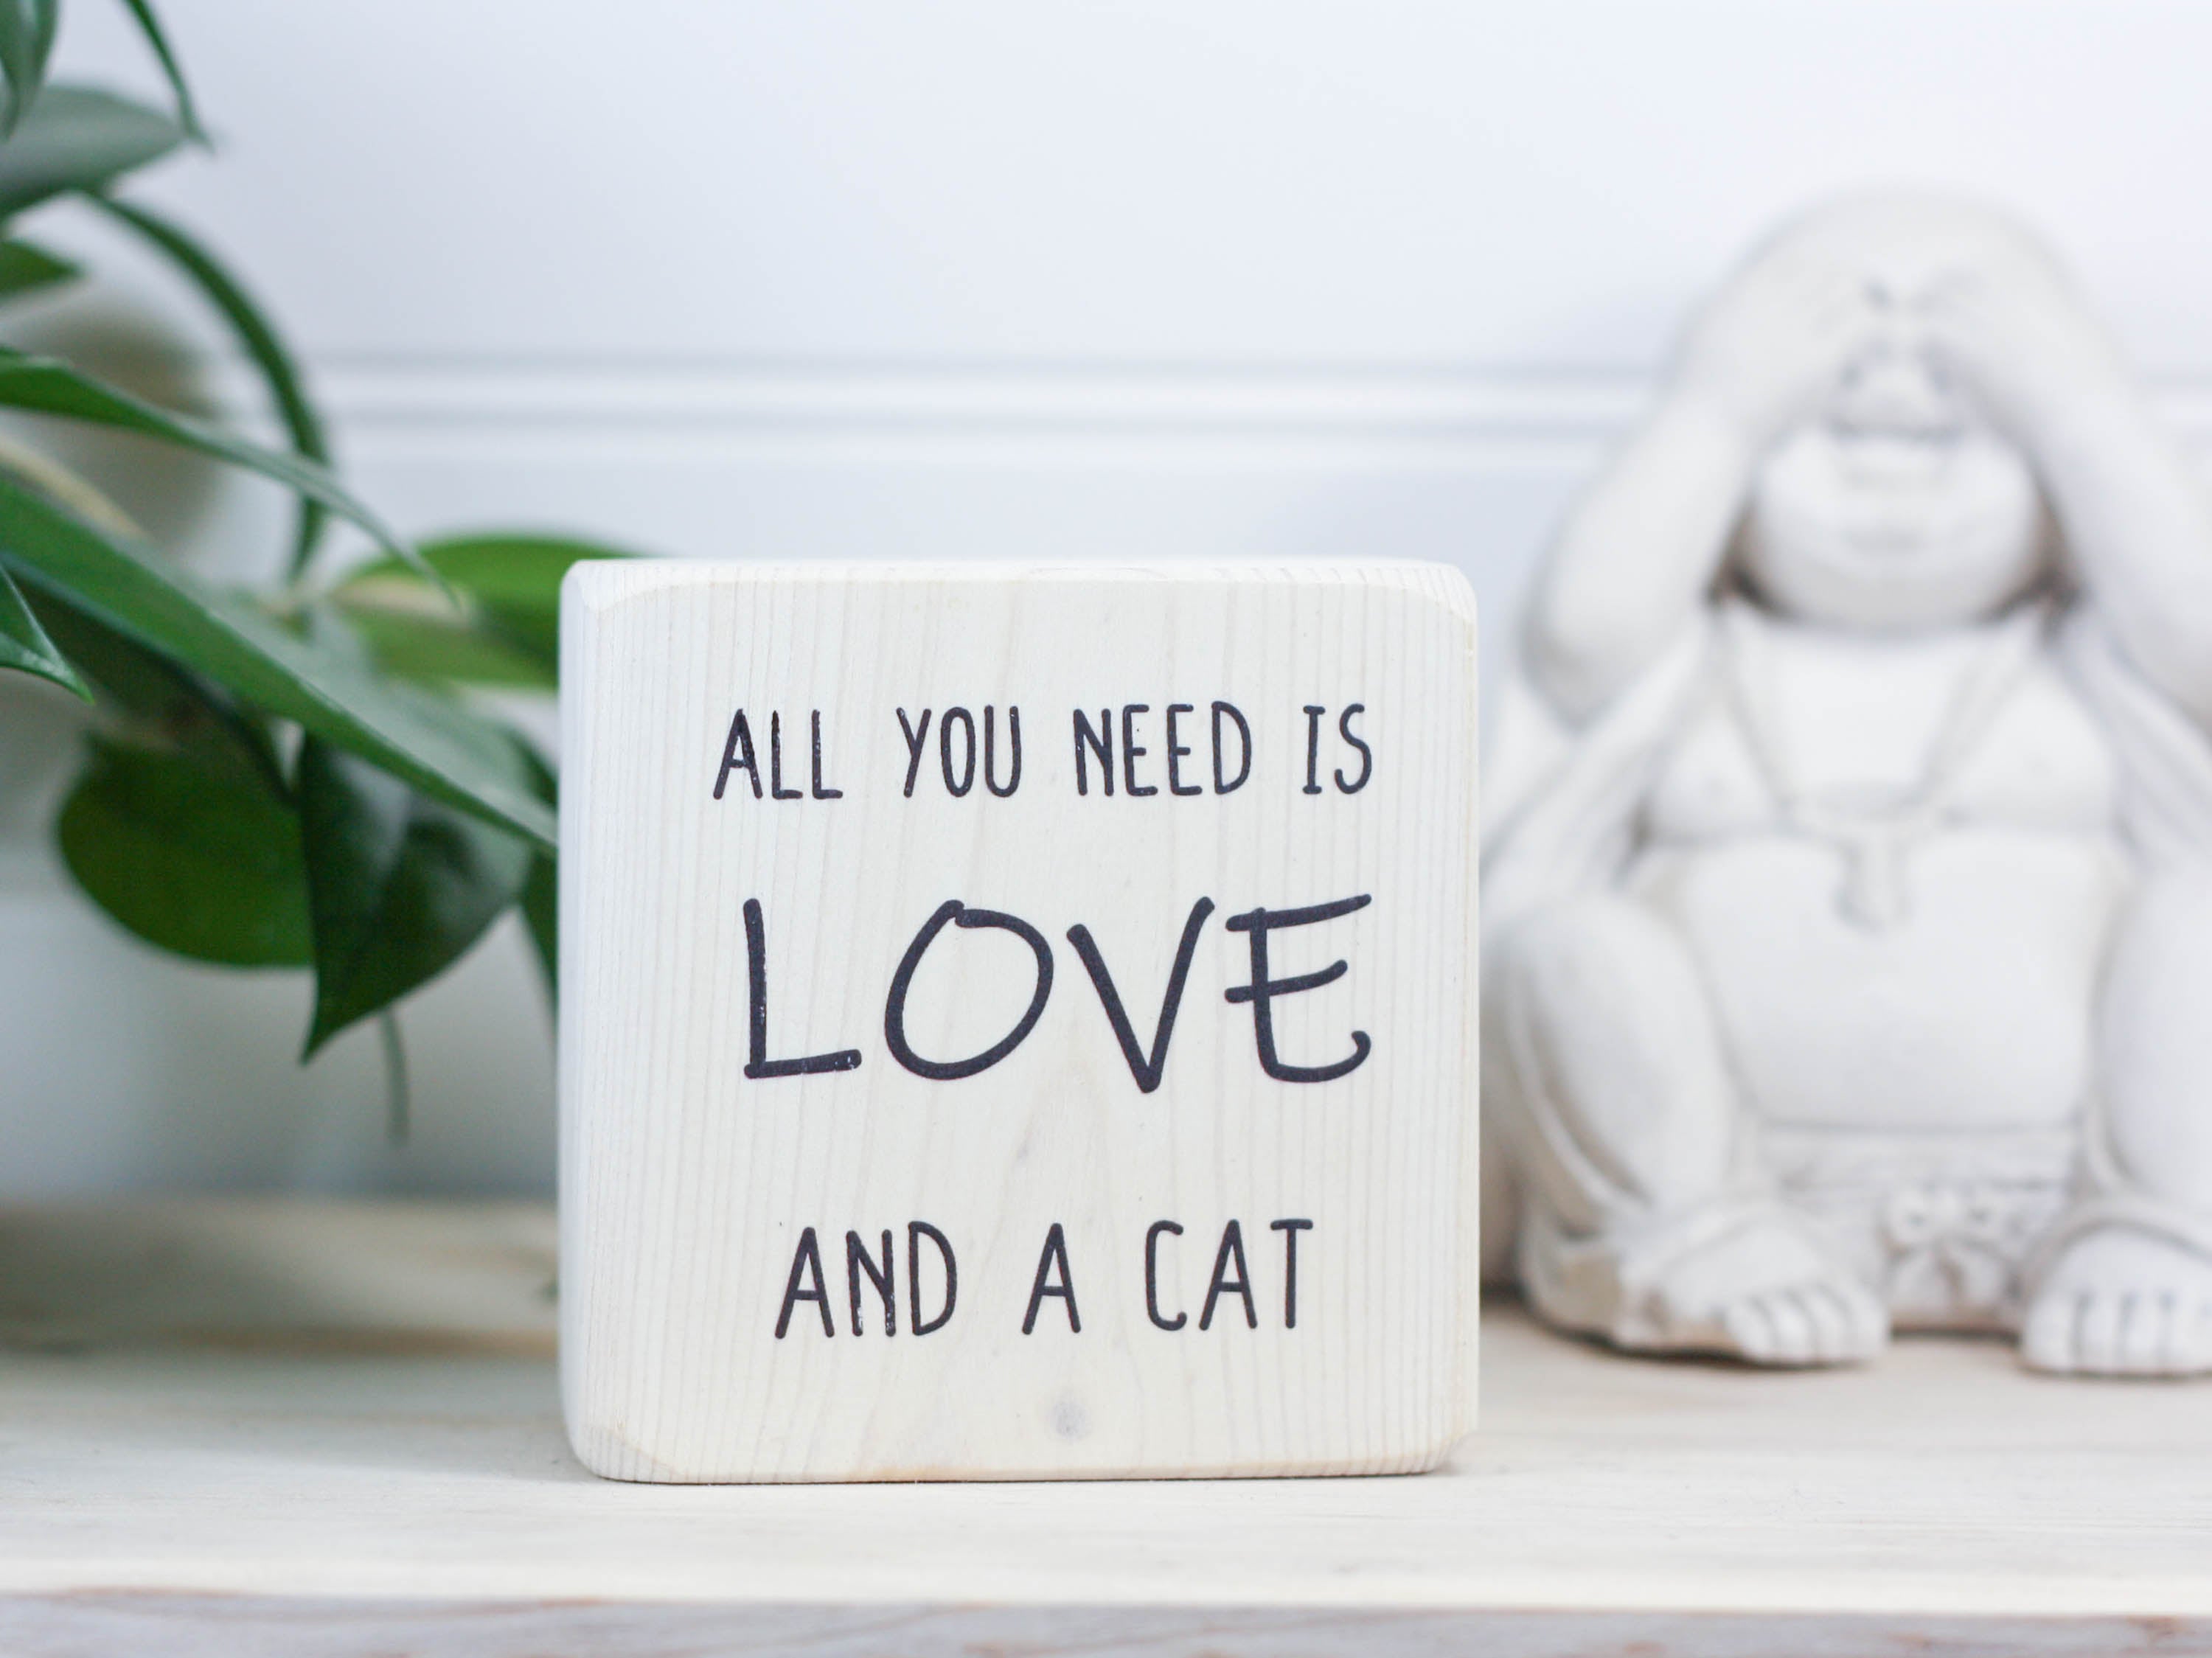 Small, freestanding, whitewash, solid wood sign with saying "All you need is love and a cat".